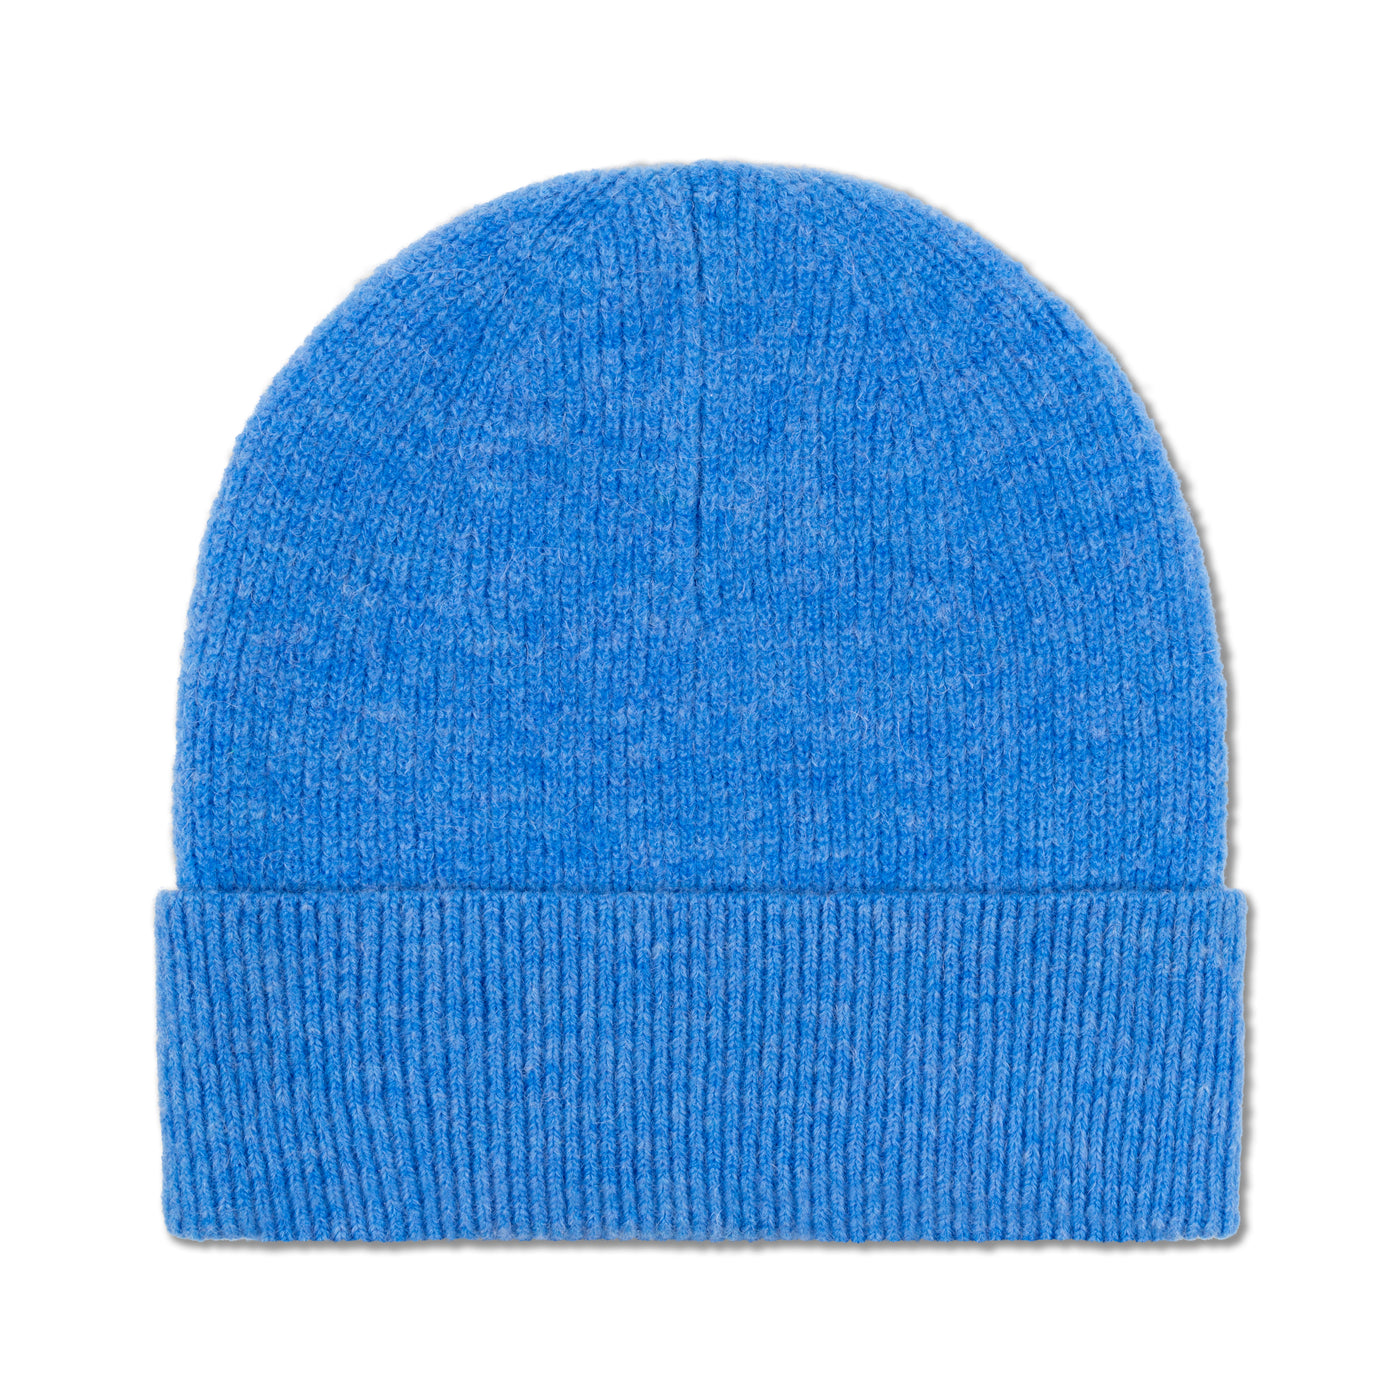 knit hat - wedgewood